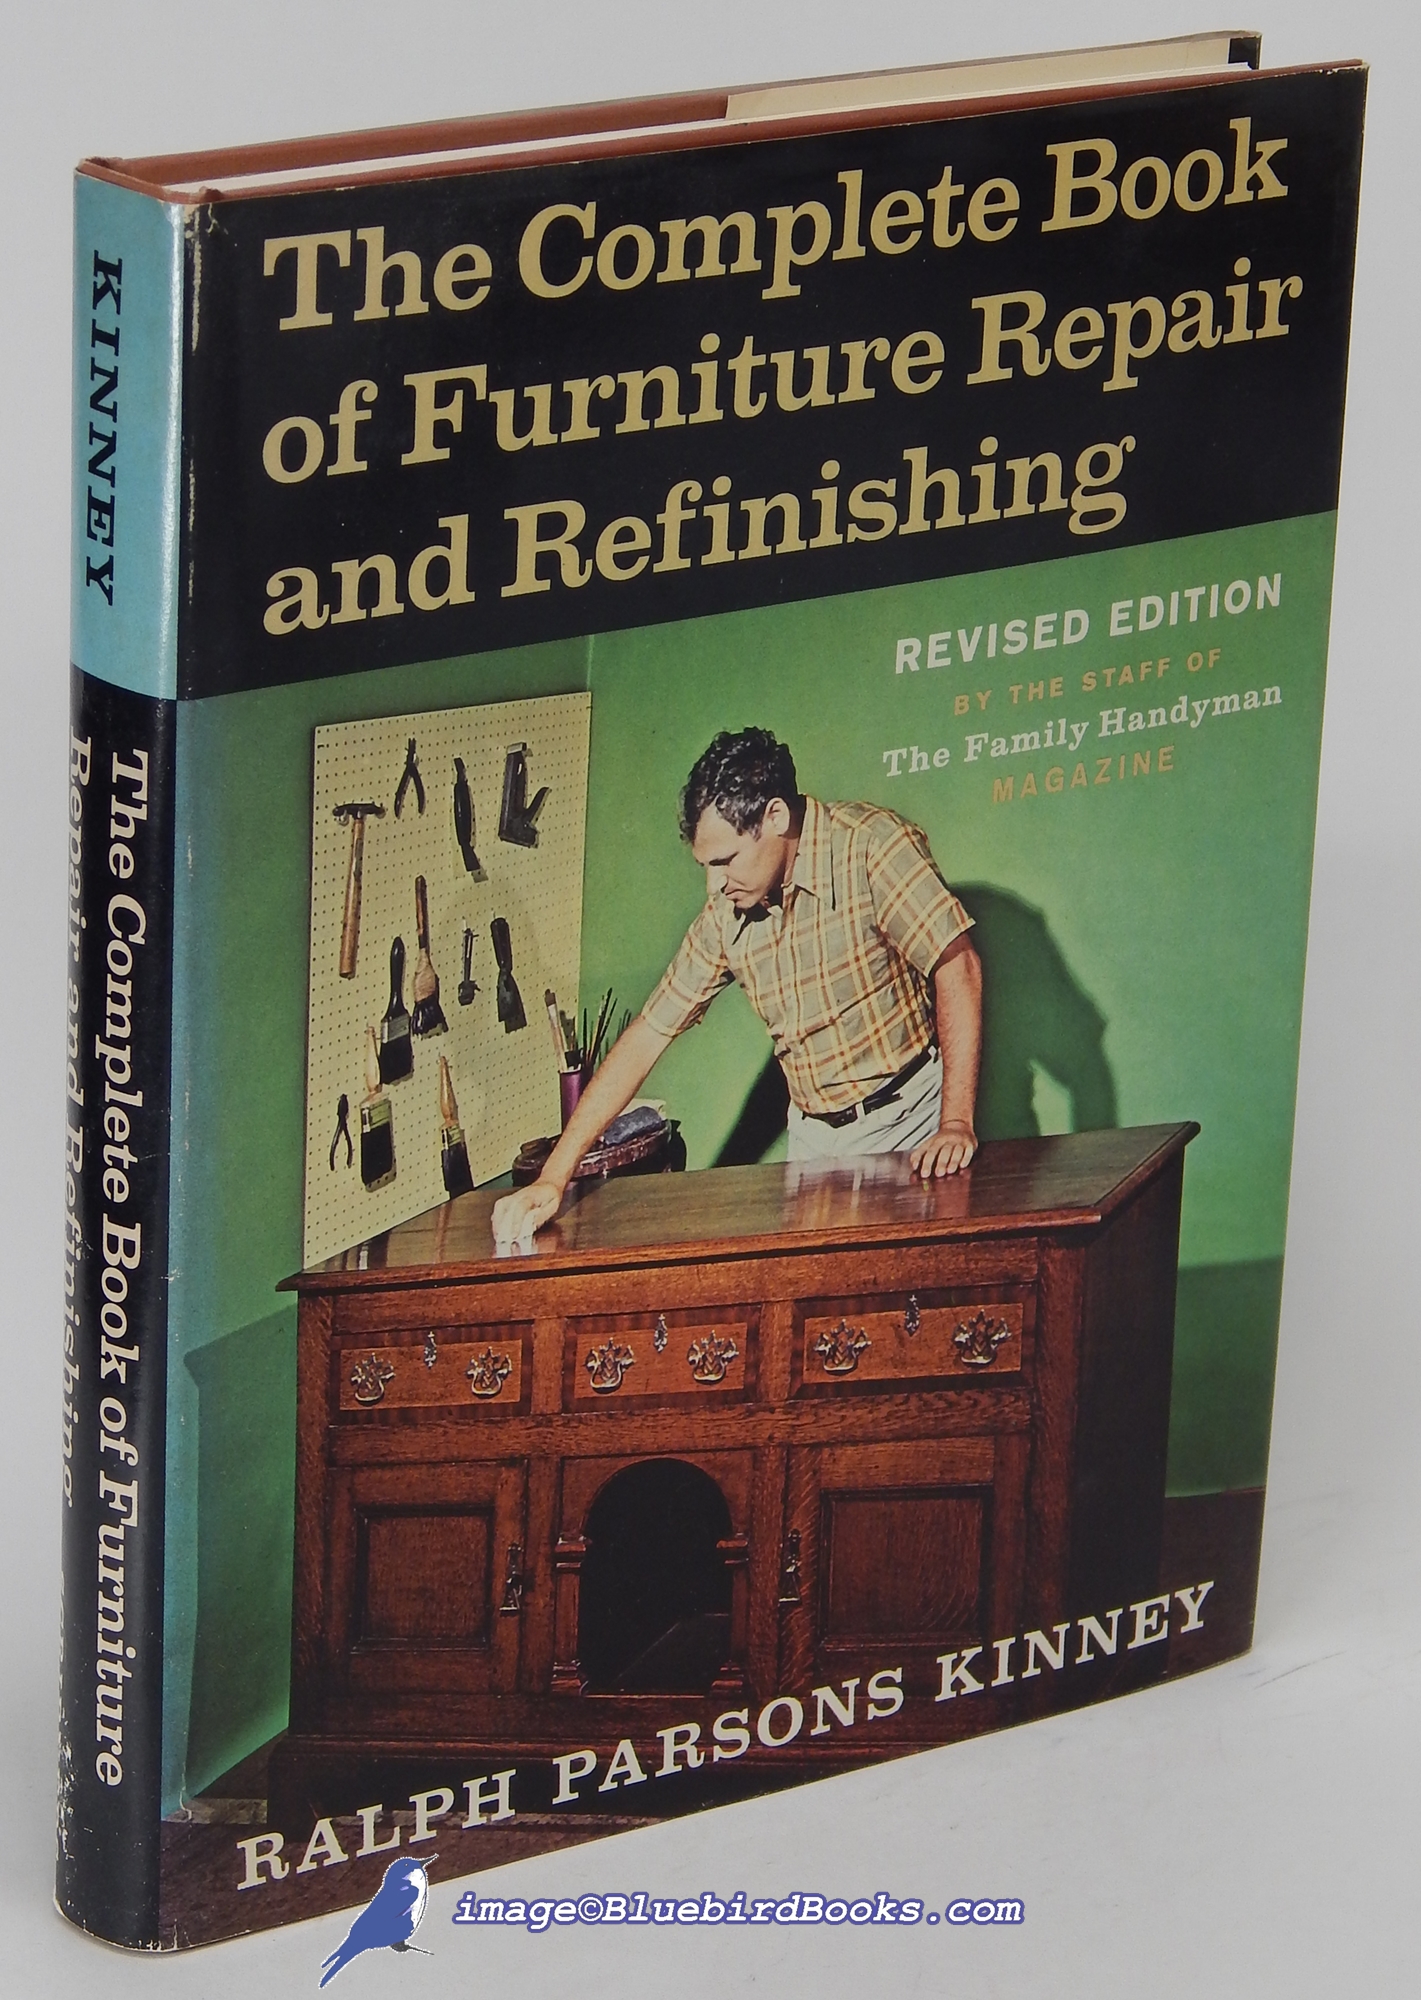 KINNEY, RALPH PARSONS - The Complete Book of Furniture Repair and Refinishing: Revised Edition